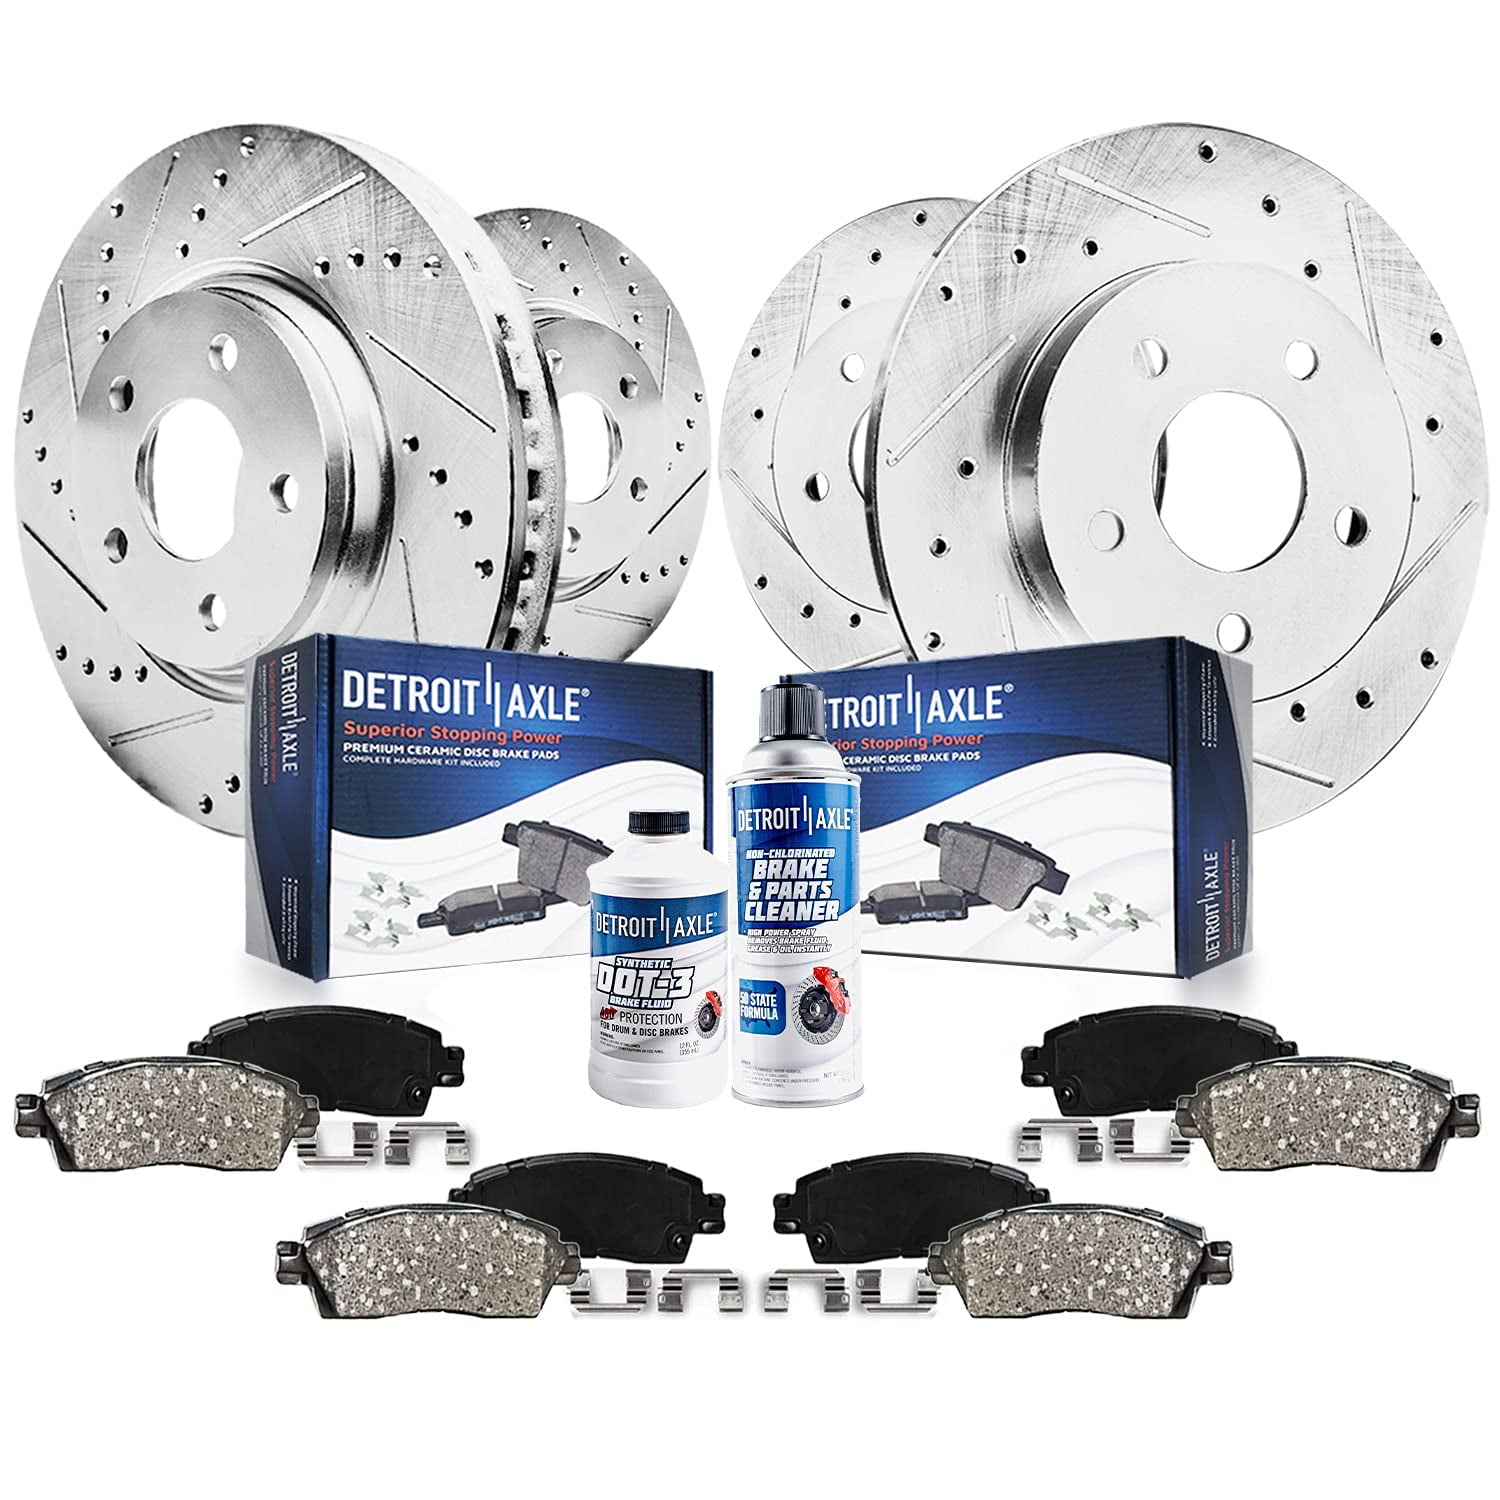 4WD 6 Lug ONLY Front Disc Replacement Brake Kit Rotors Ceramic Pads w/Hardware for 2005 2006 2007 2008 Ford F-150 Detroit Axle Lincoln Mark LT 